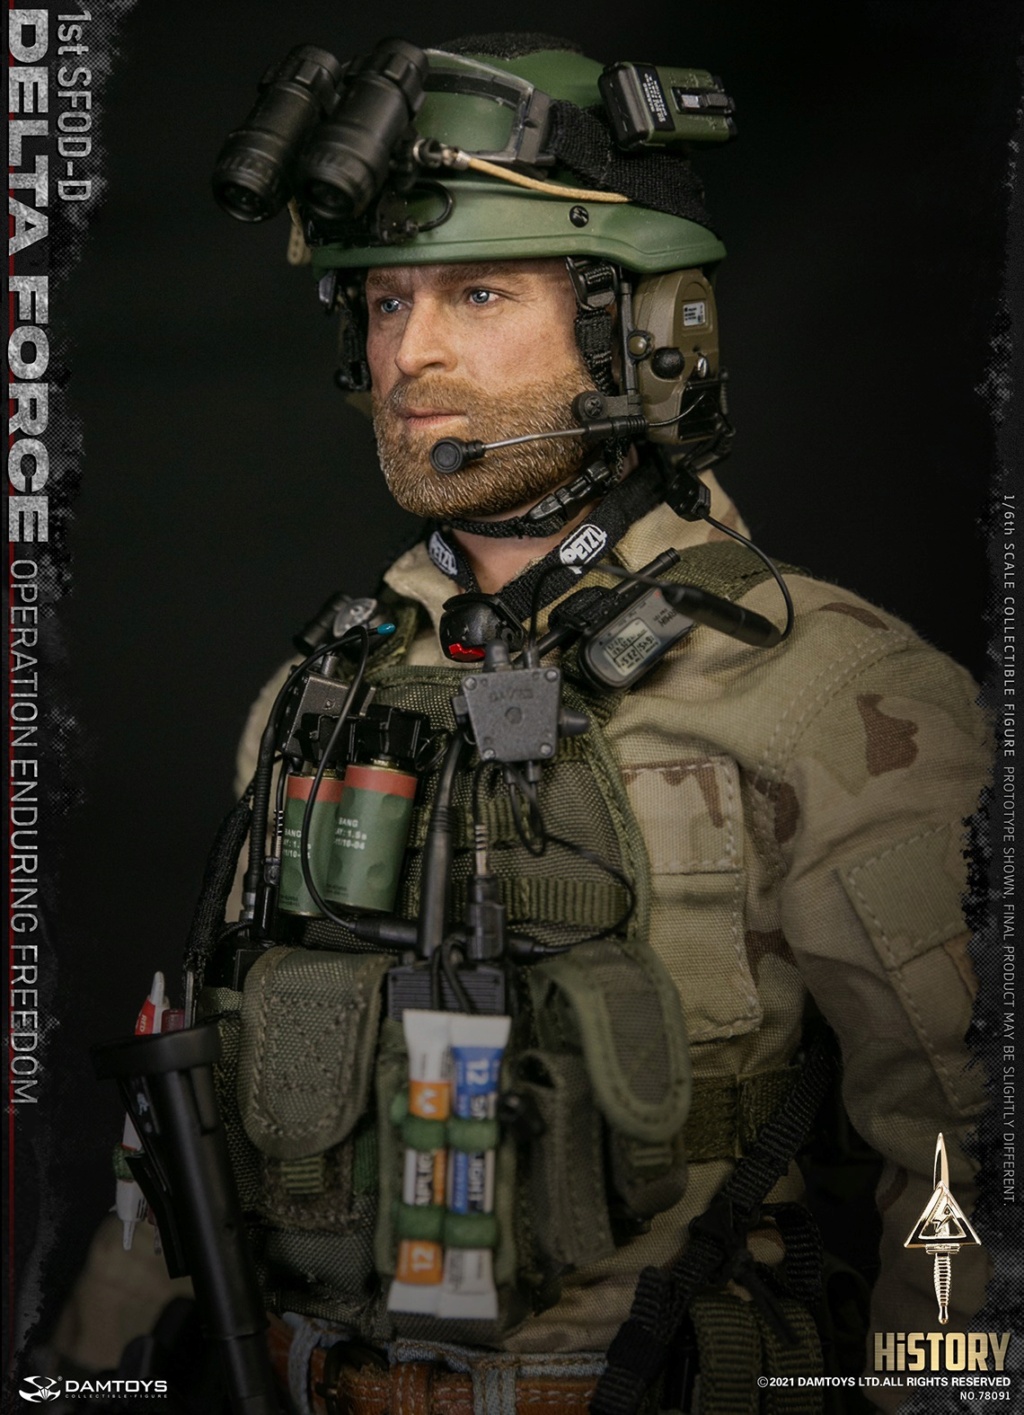 1stSFOD-D - NEW PRODUCT: DAMTOYS: 1/6 Delta Forces 1st SFOD-D Operation Enduring Freedom #78091 10521610